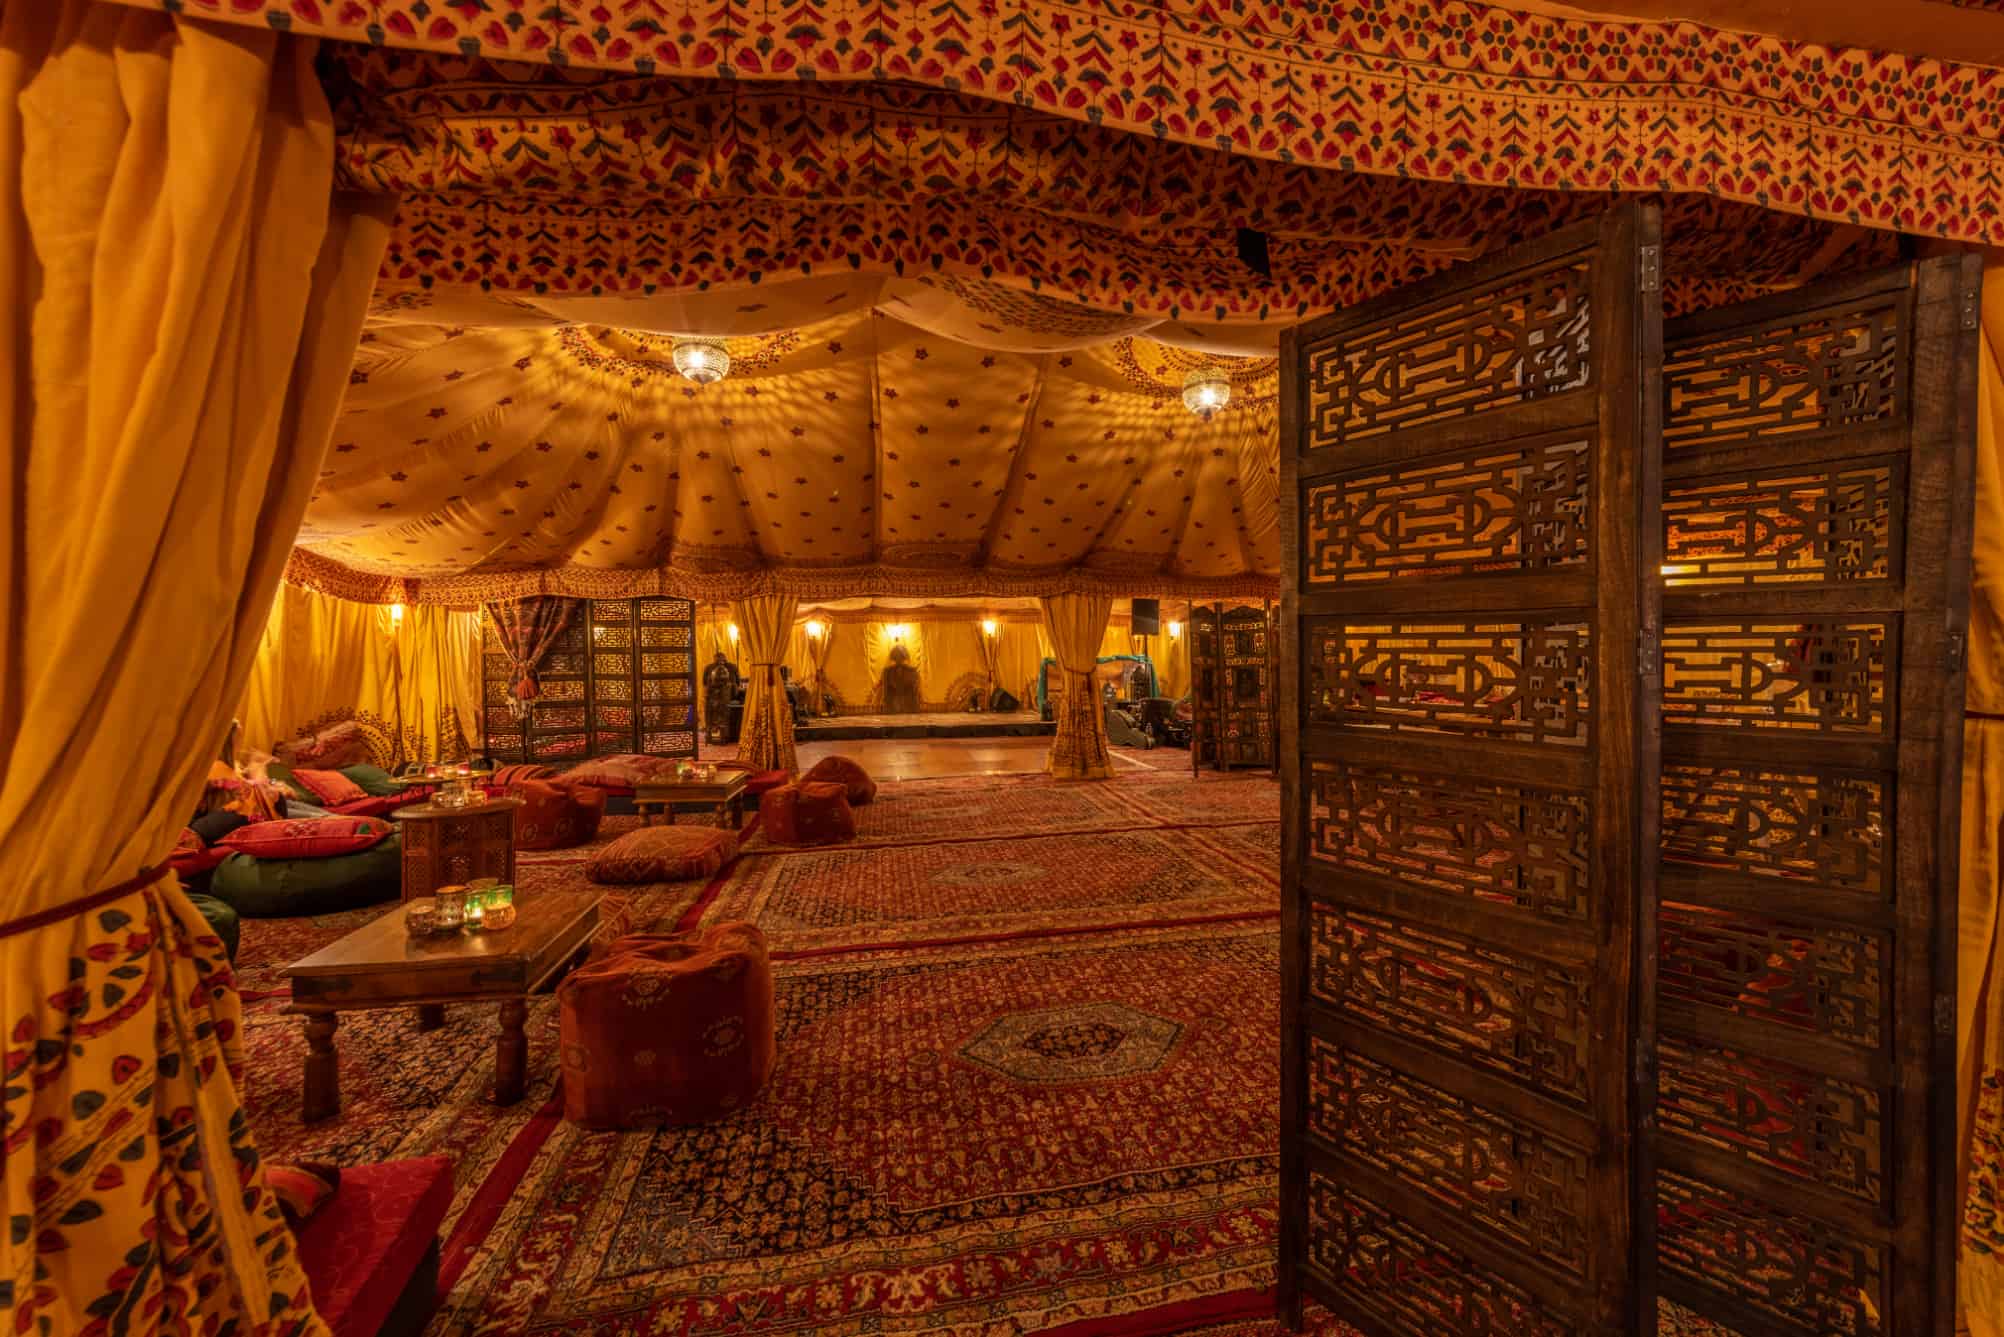 Inside an Arabian tent with wooden screens